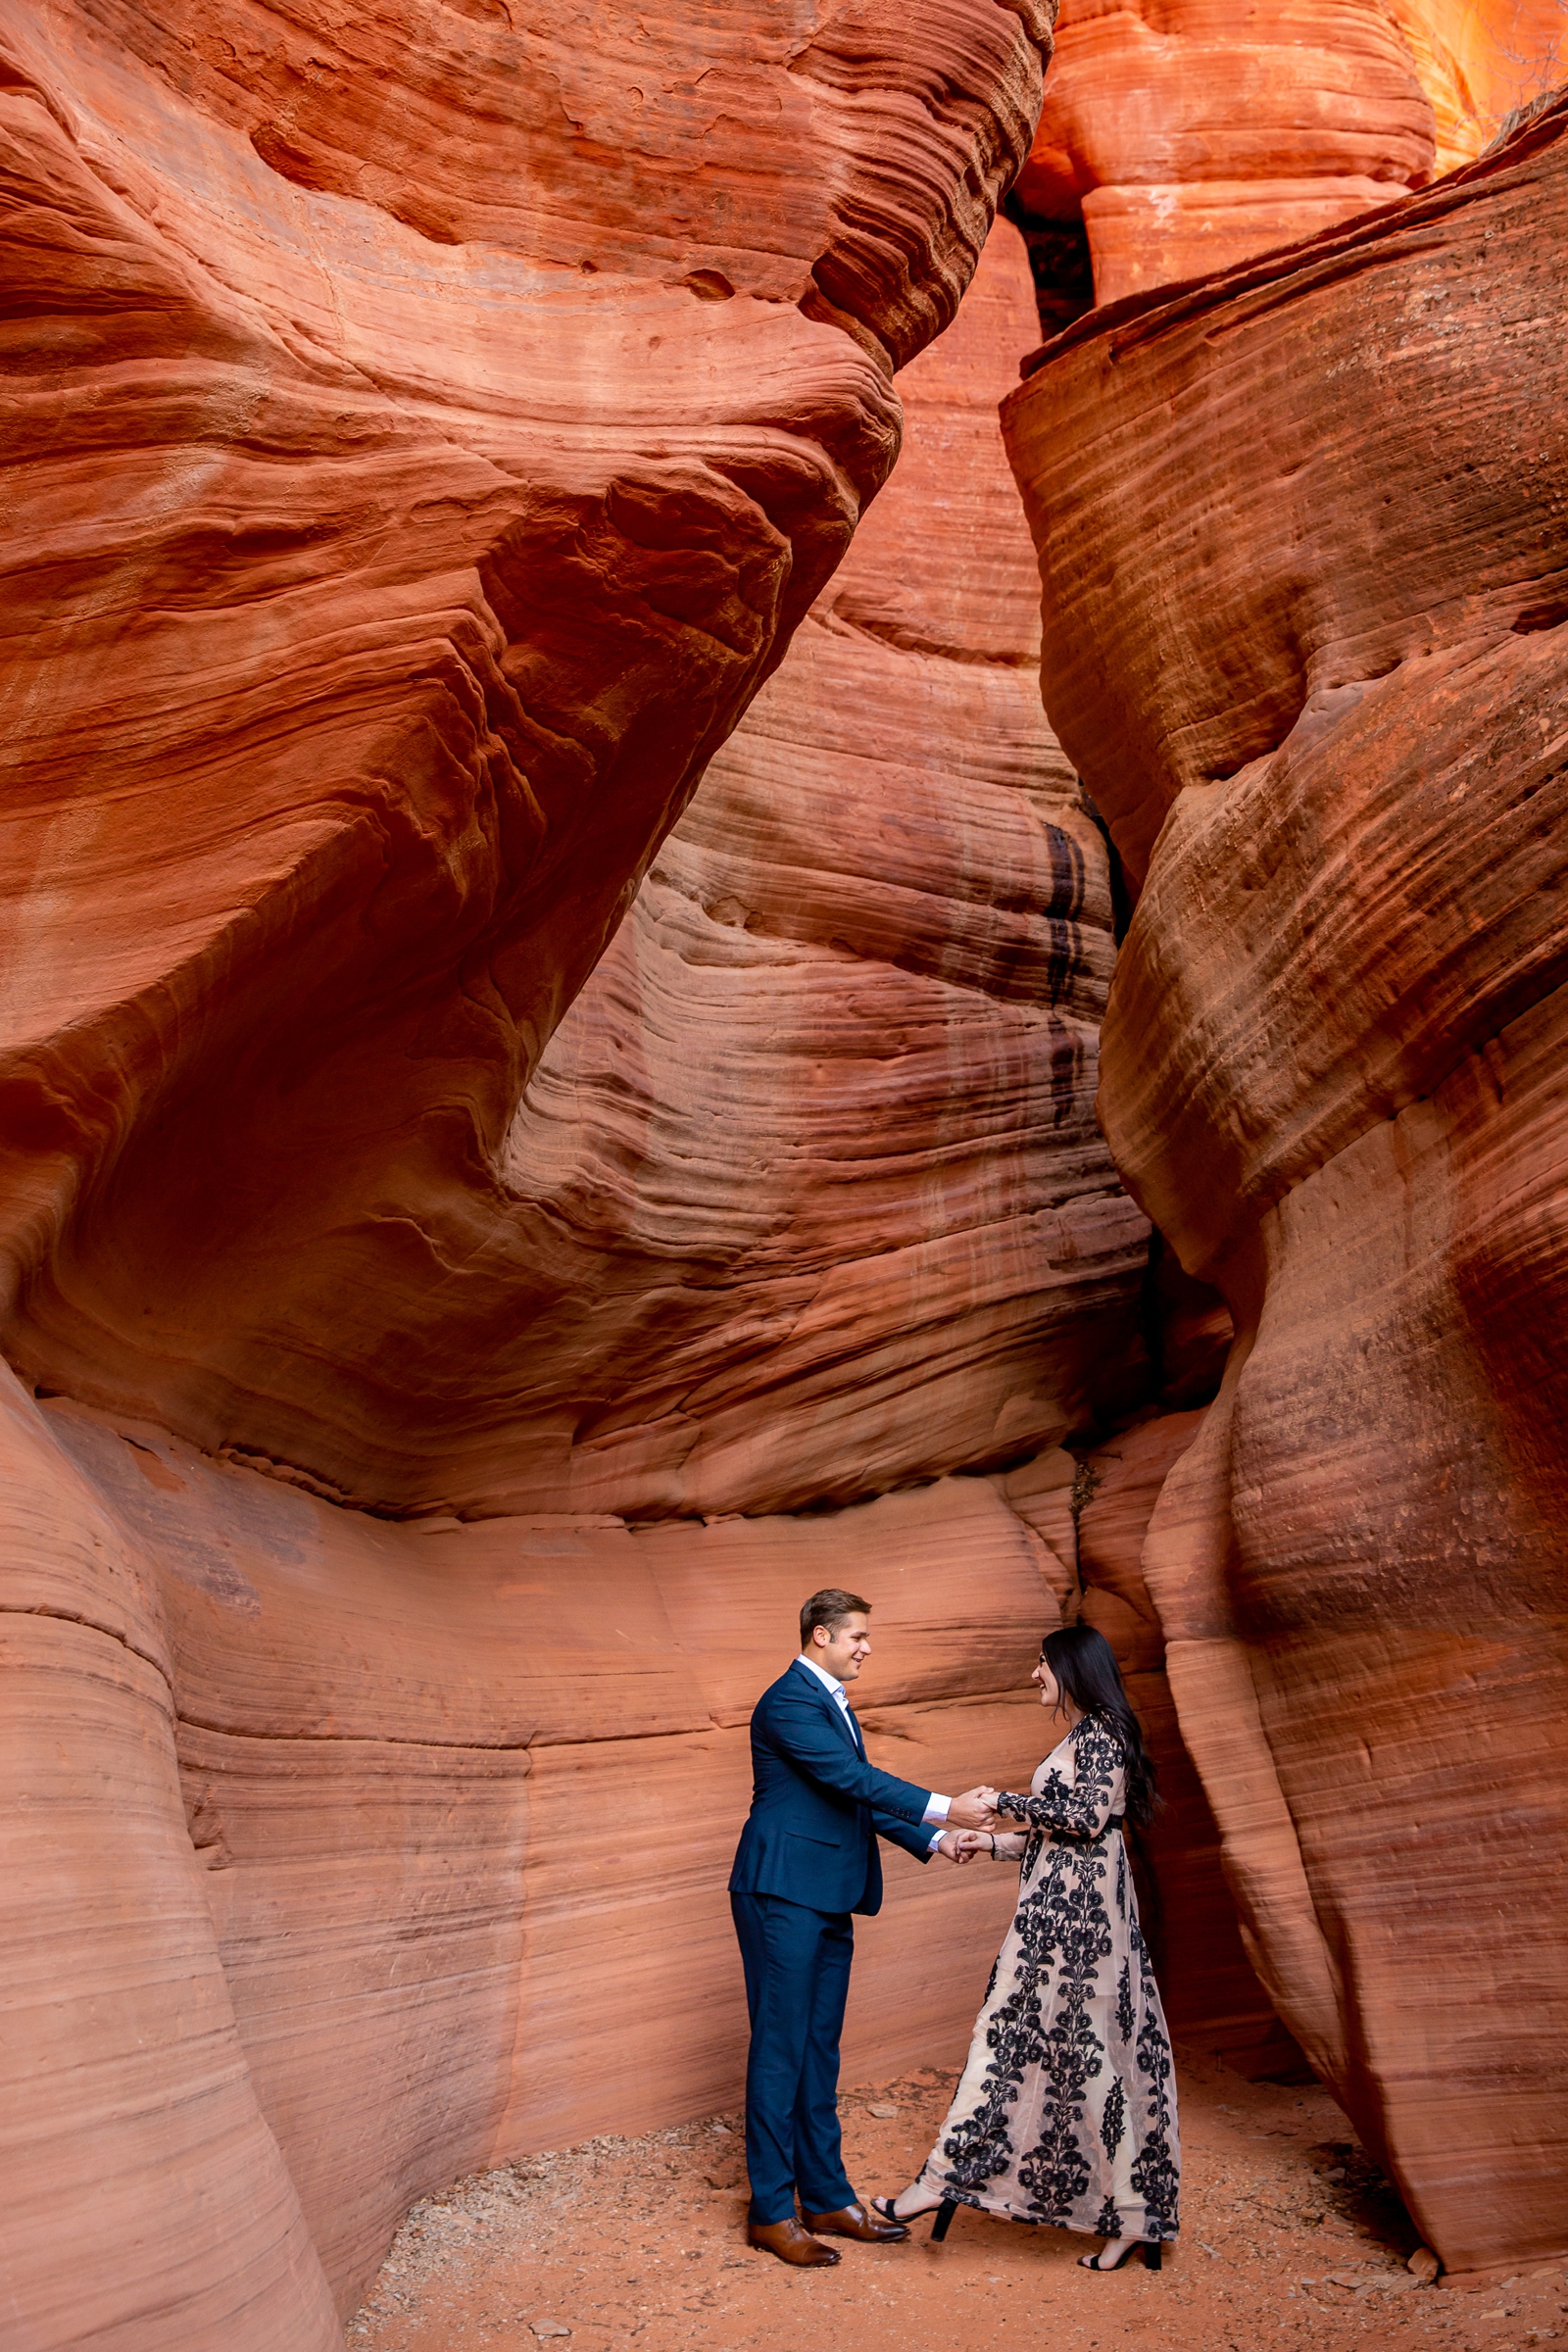 Playful couple in a Utah slot canyon.